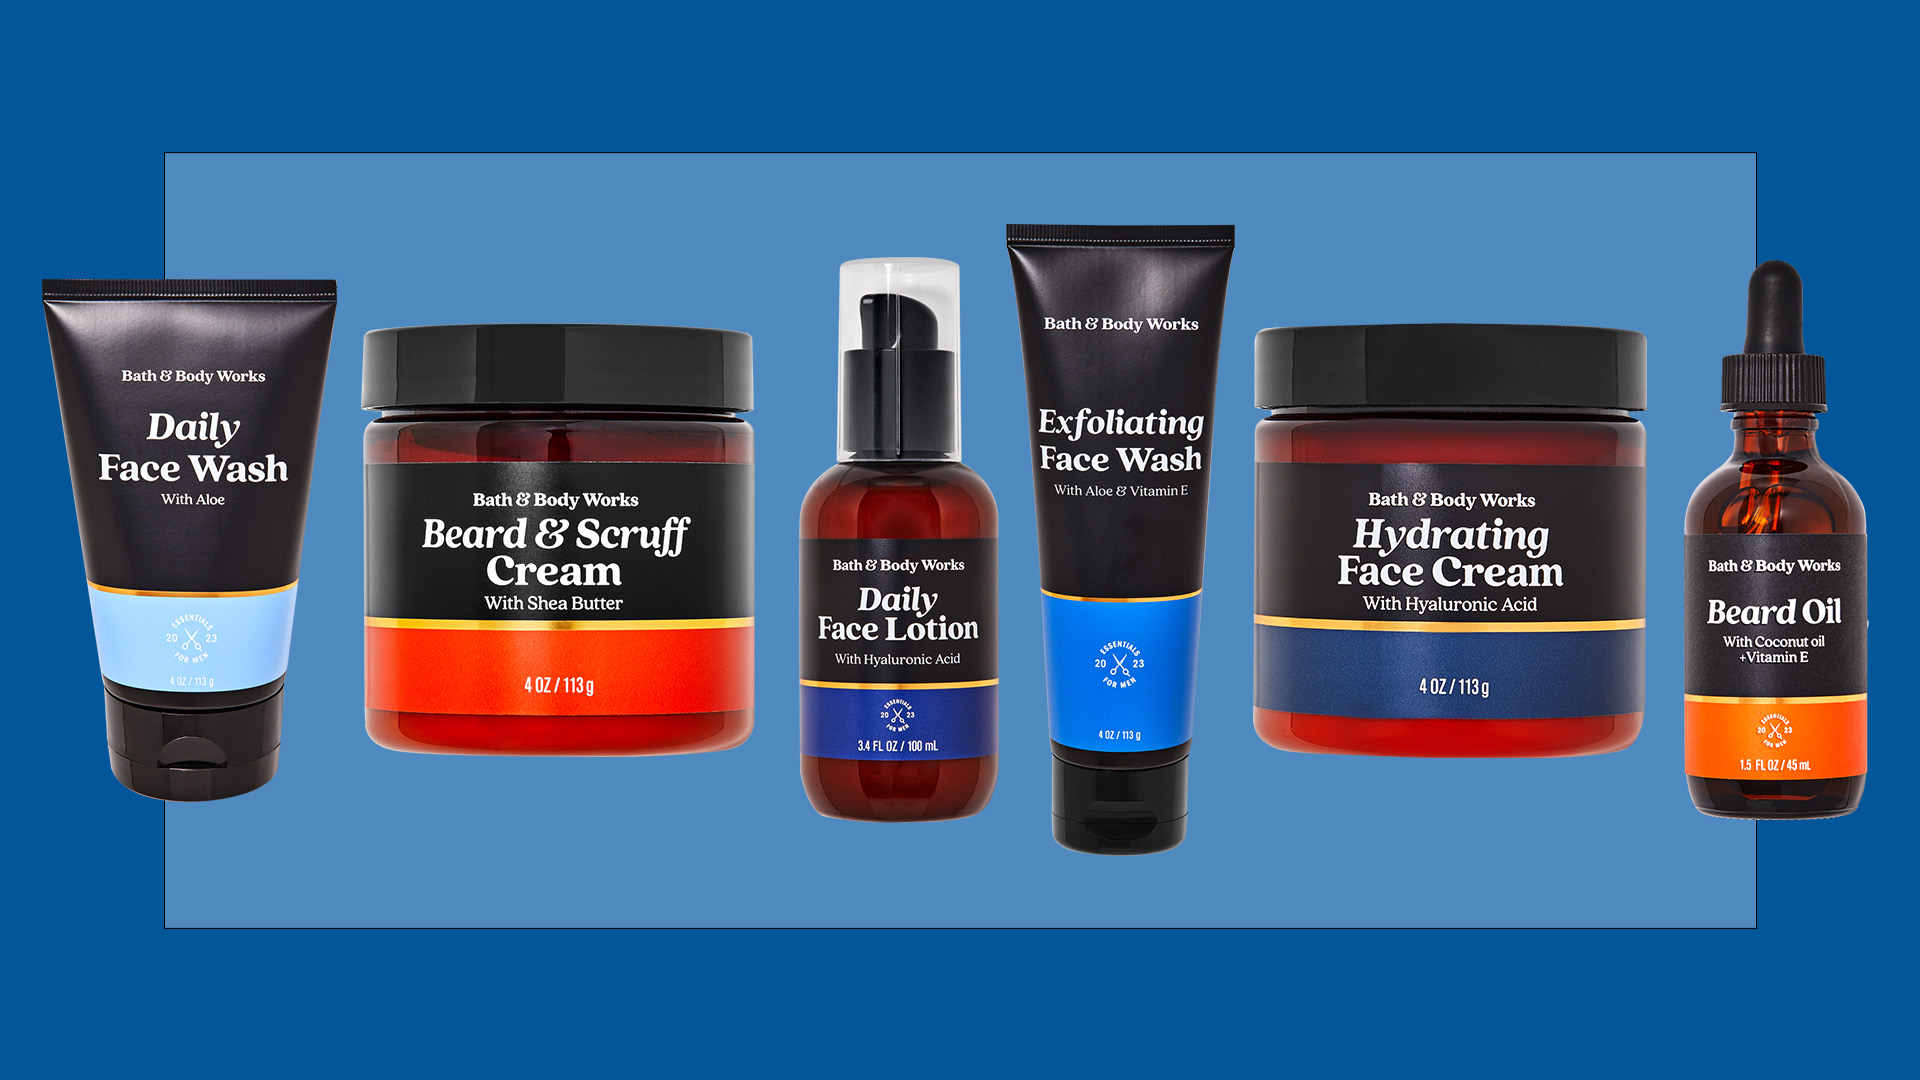 Get Fresh With the Bath & Body Works Men's Shop